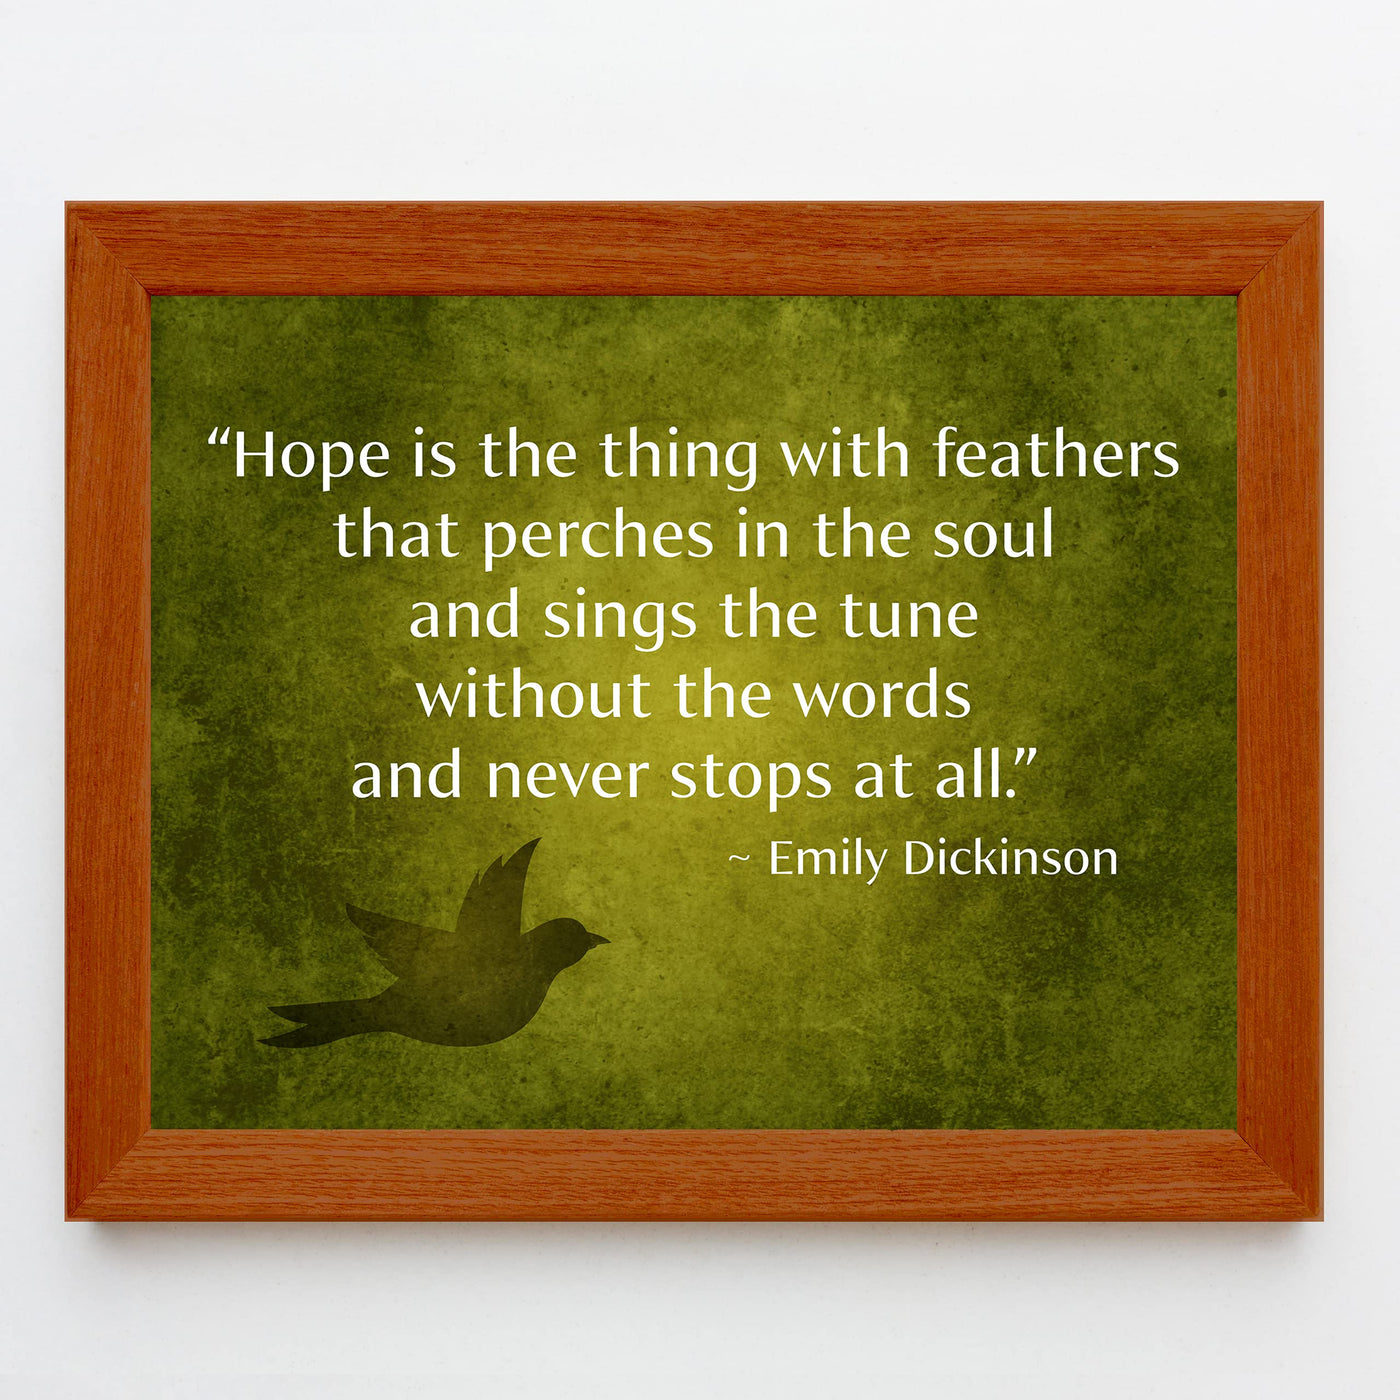 Hope Is the Thing With Feathers-Emily Dickinson Poetic Wall Art-10x8" Inspirational Poem Print w/Abstract Bird Image-Ready to Frame. Poetry Decor for Home-Office-Study-Library. Great Literary Gift!